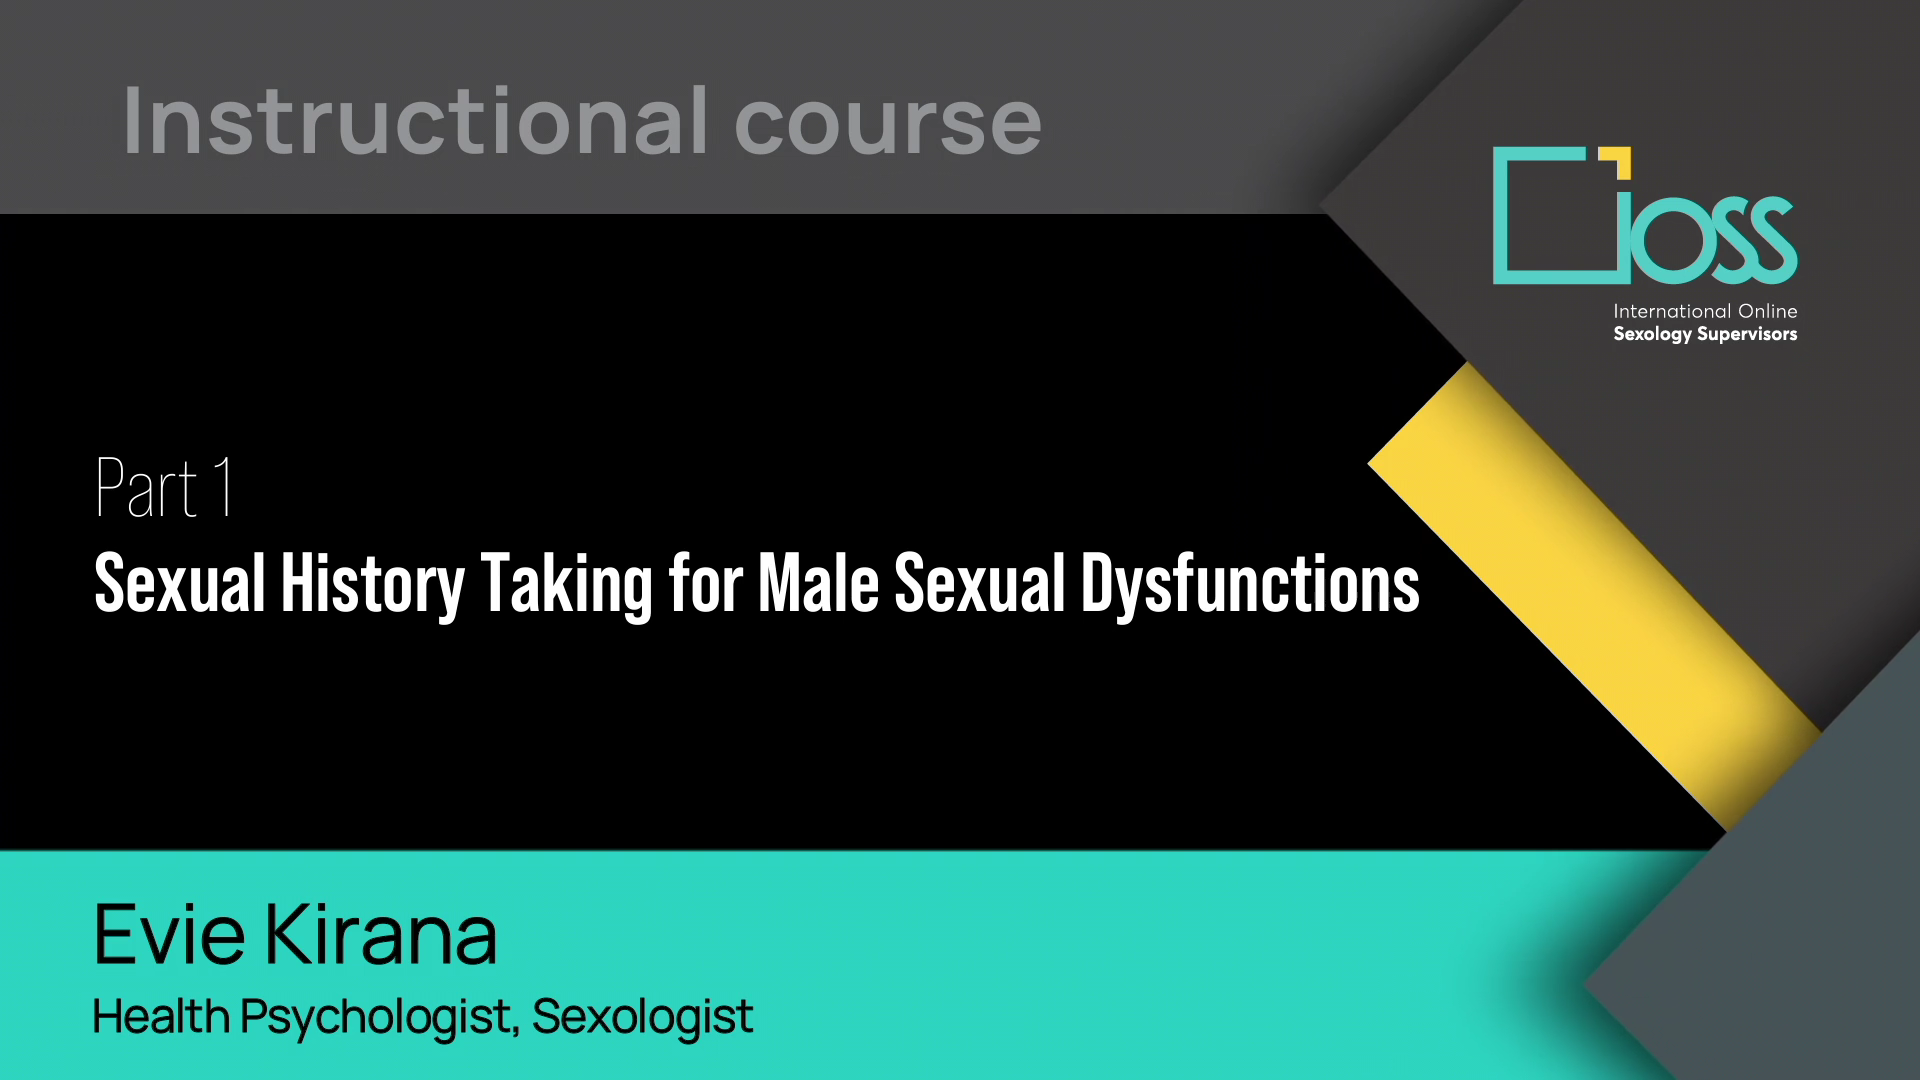 Part 1 Sexual History Taking for Male Sexual Dysfunctions (Part 1 & 2)